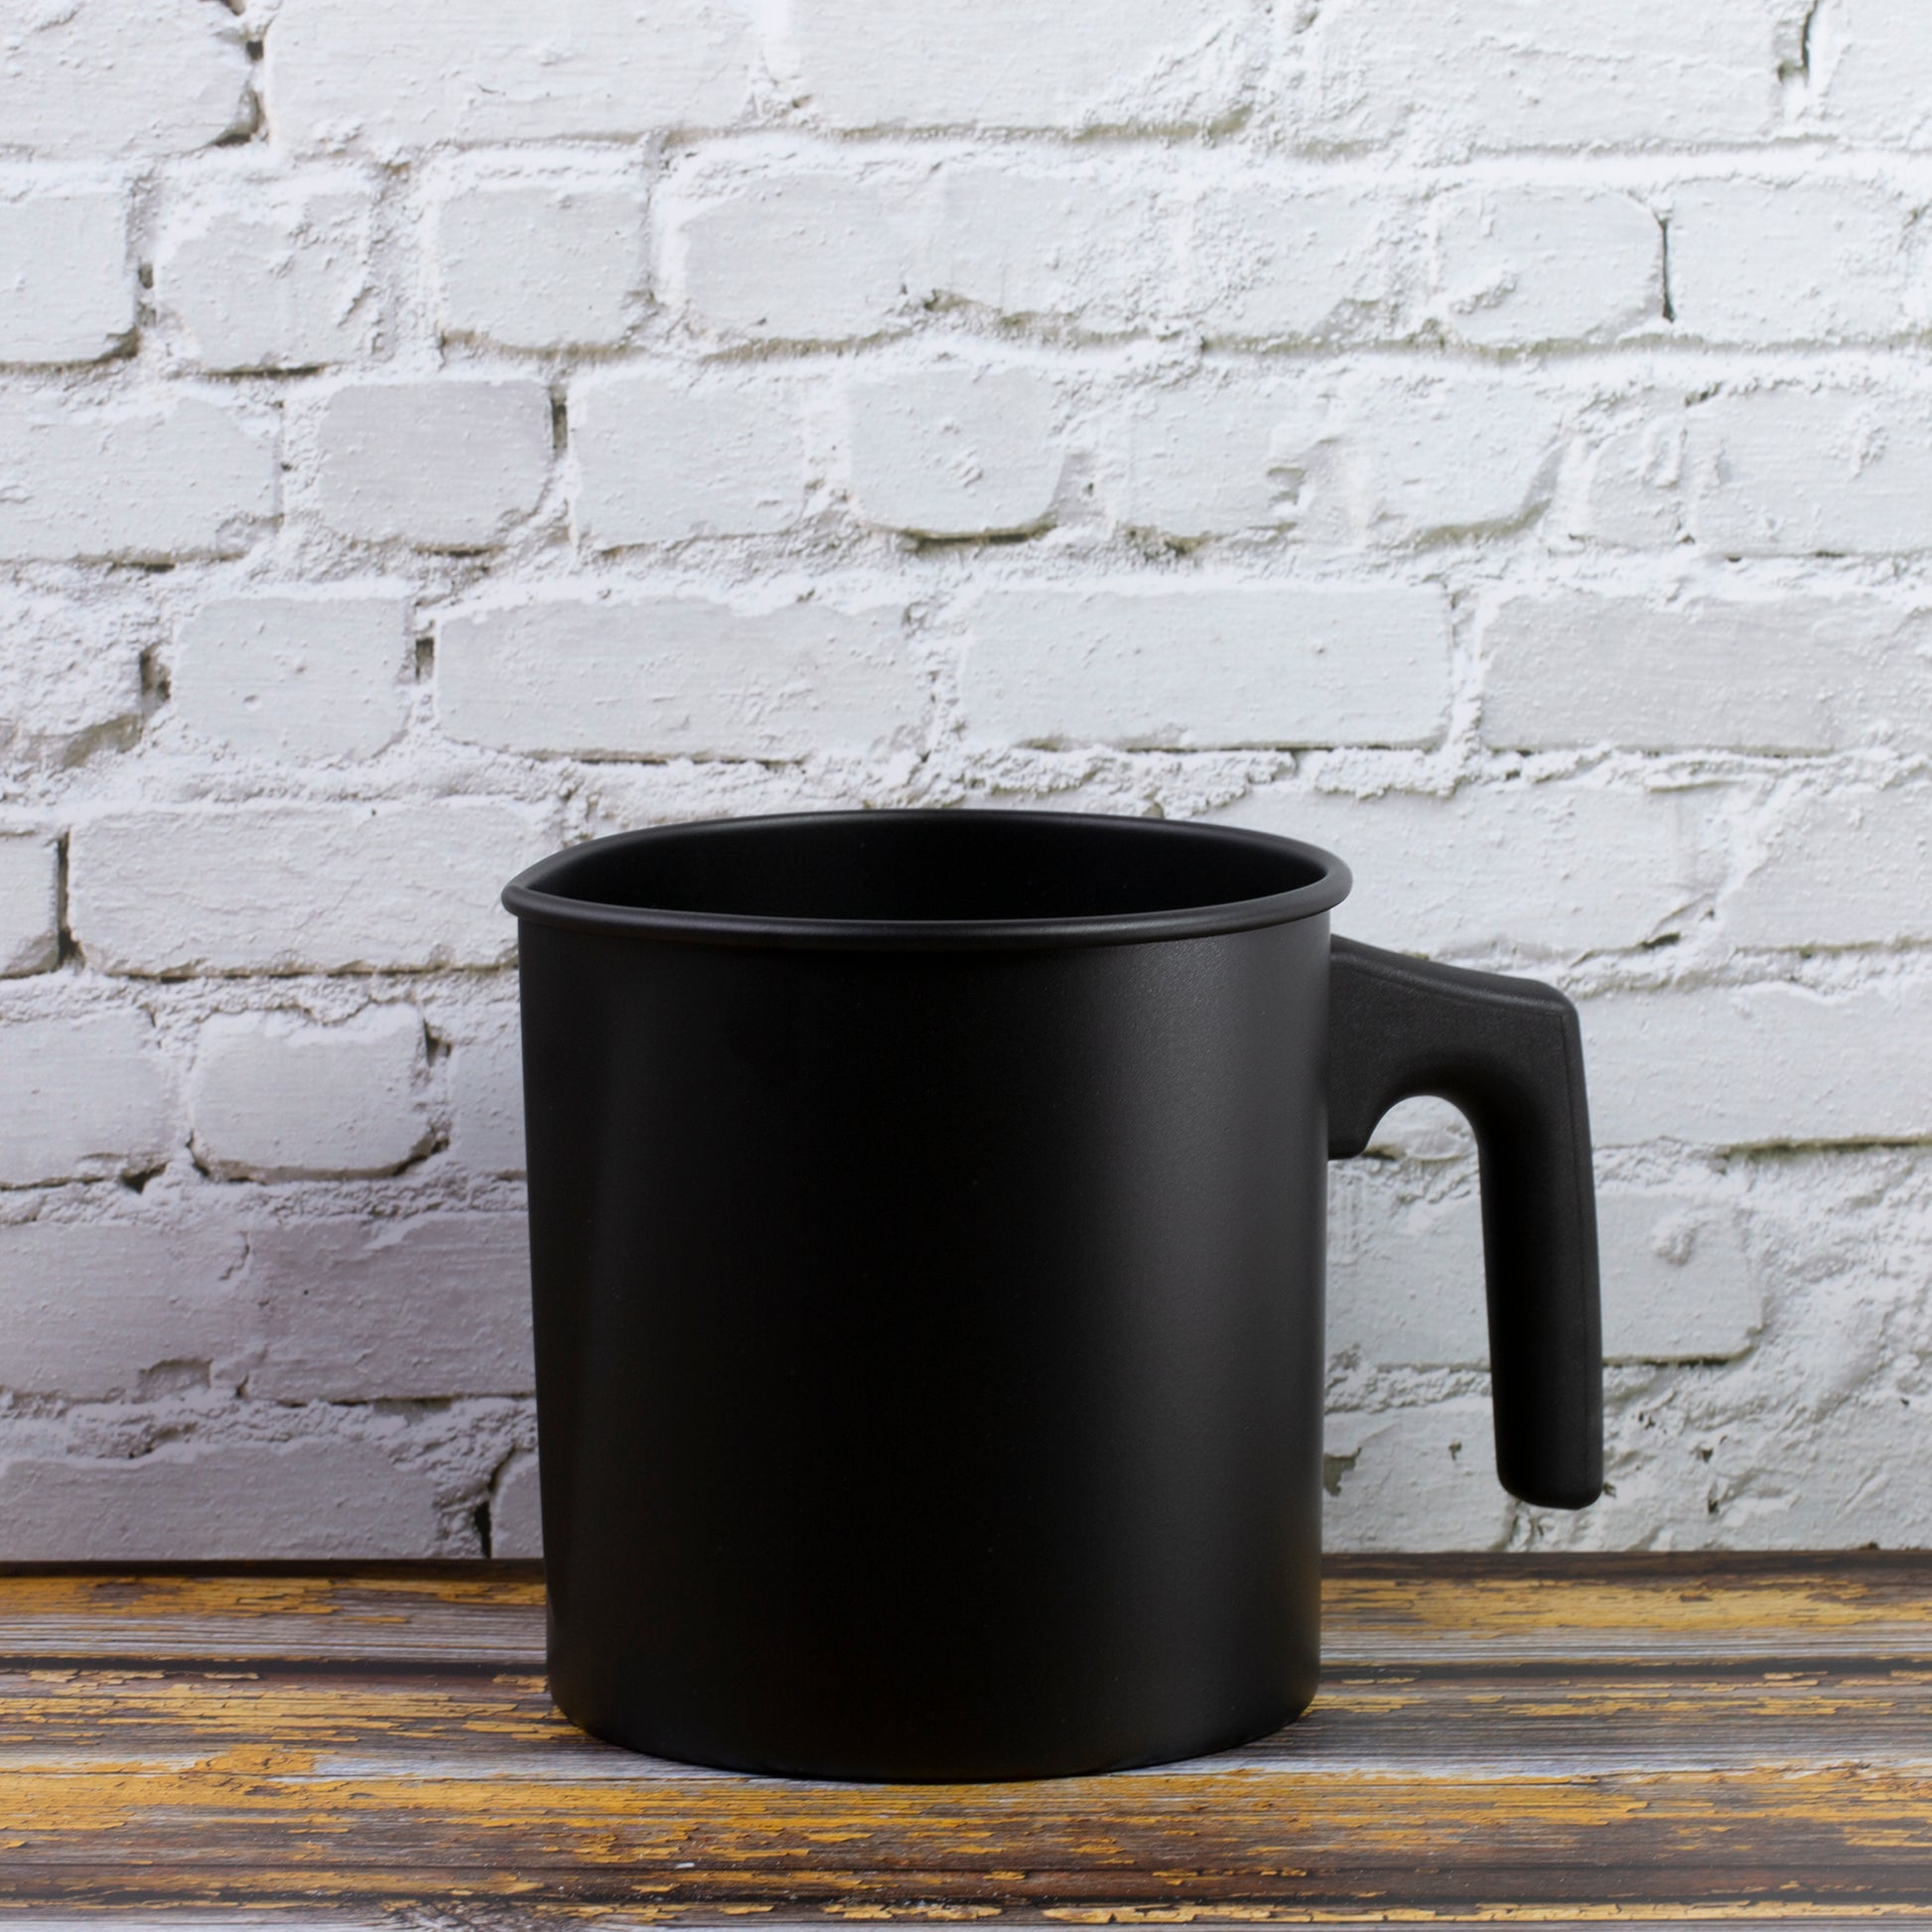 black pouring pitcher